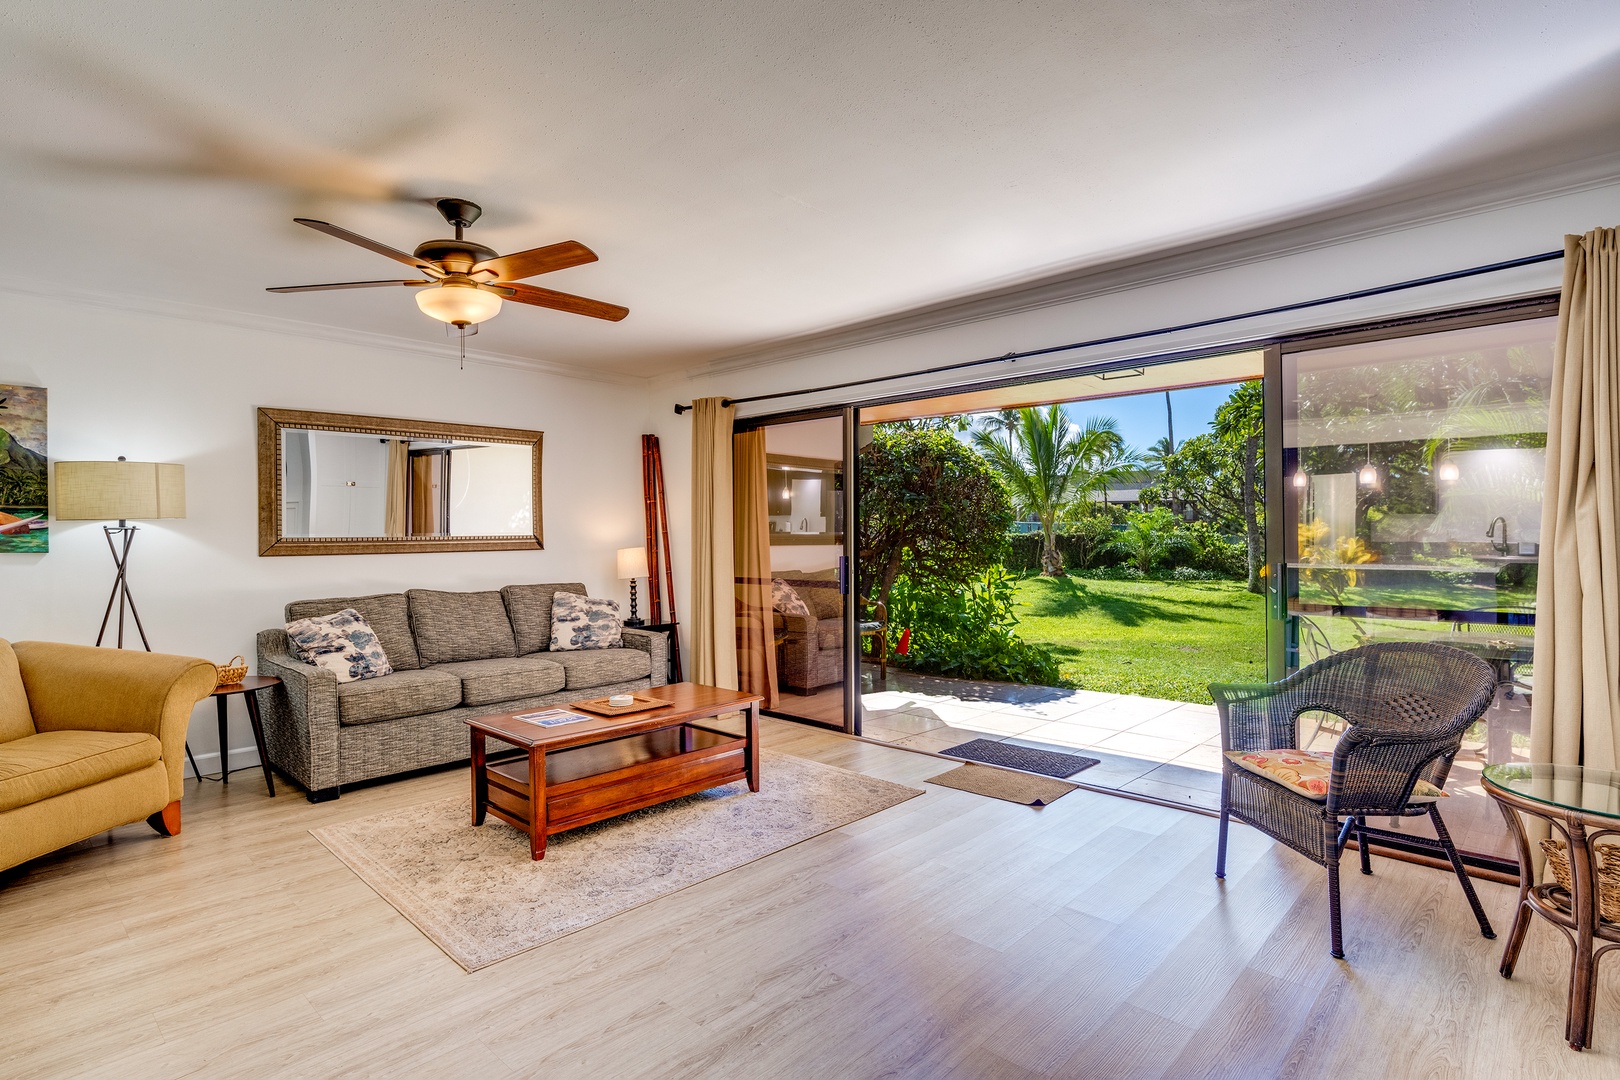 Kihei Vacation Rentals, Koa Resort 1B - Lanai connects to garden area with the pool steps away.